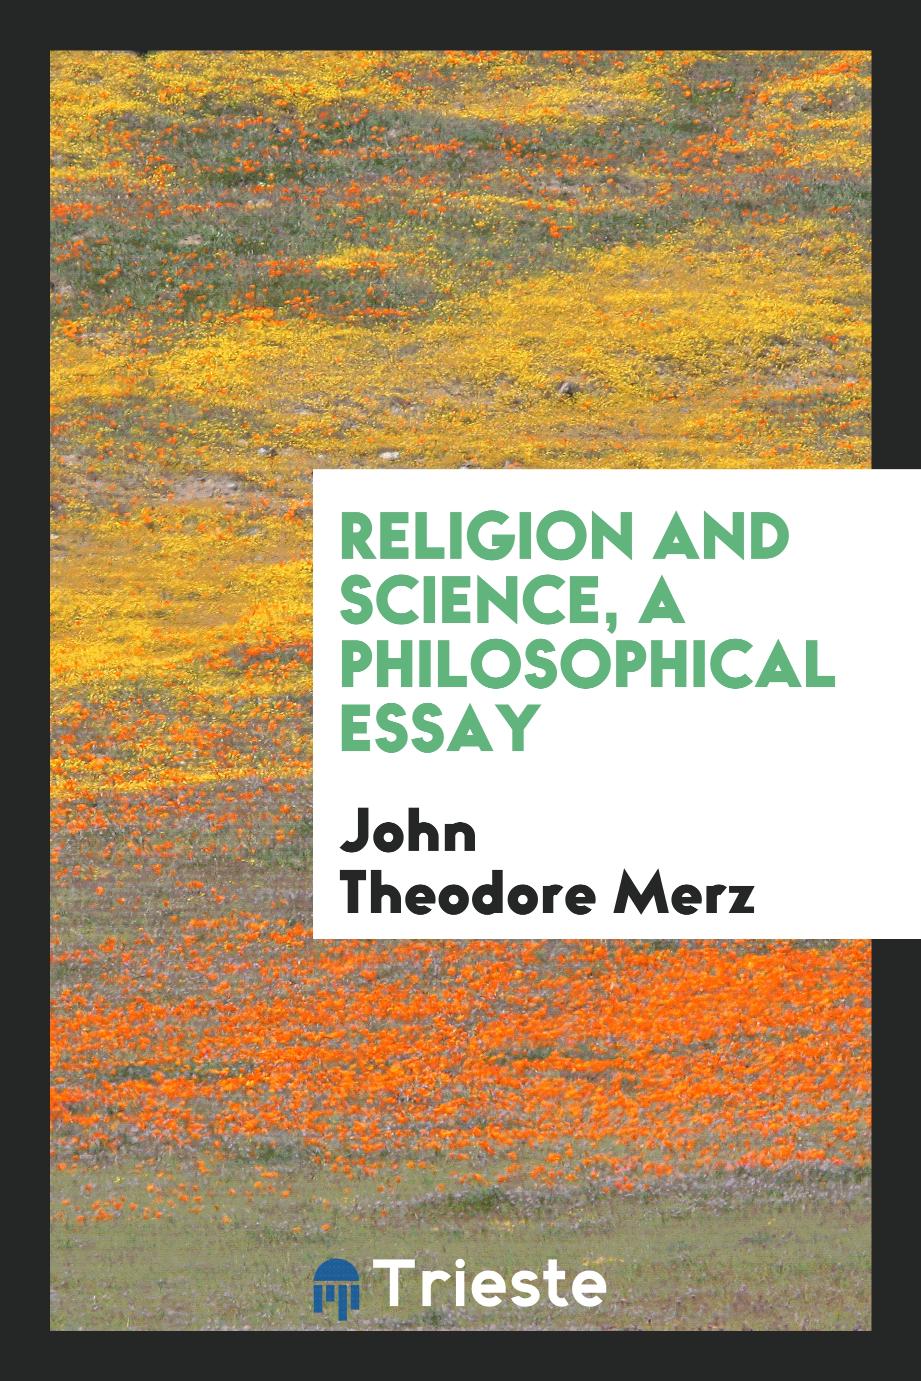 Religion and science, a philosophical essay